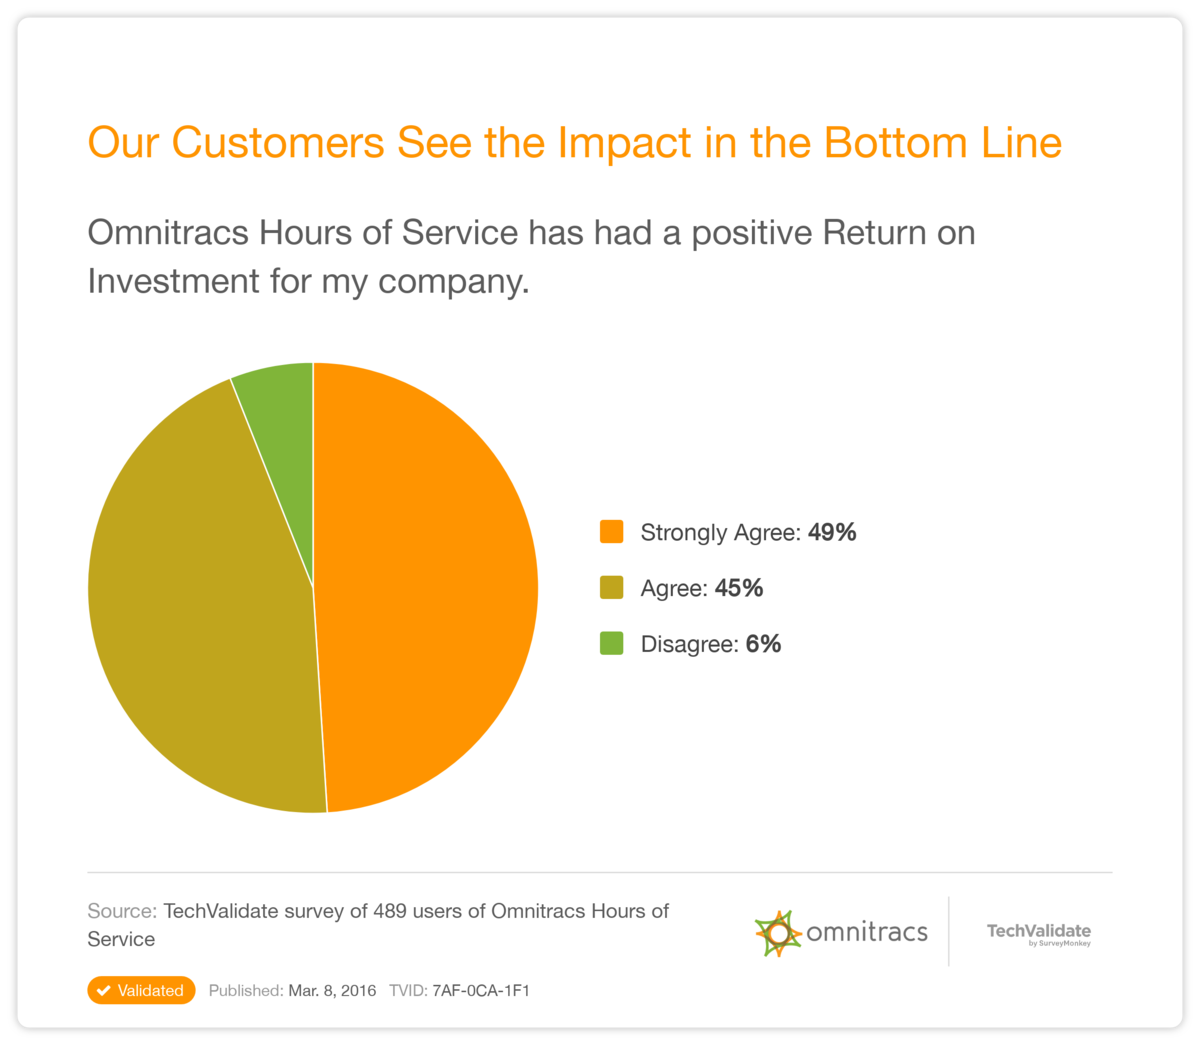 Our Customers See the Impact in the Bottom Line